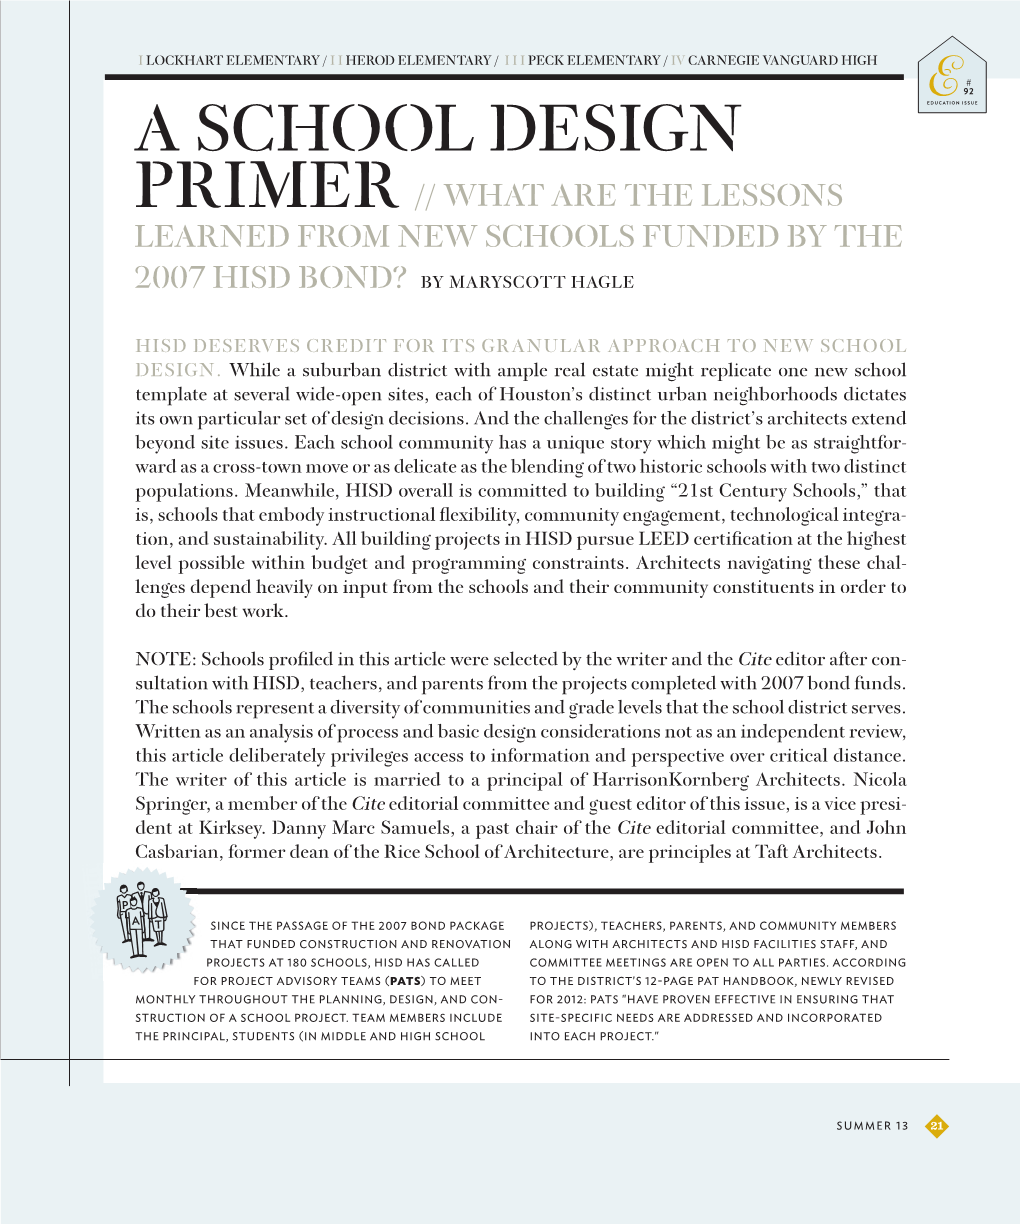 A School Design Primer // What Are the Lessons Learned from New Schools Funded by the 2007 Hisd Bond? by Maryscott Hagle